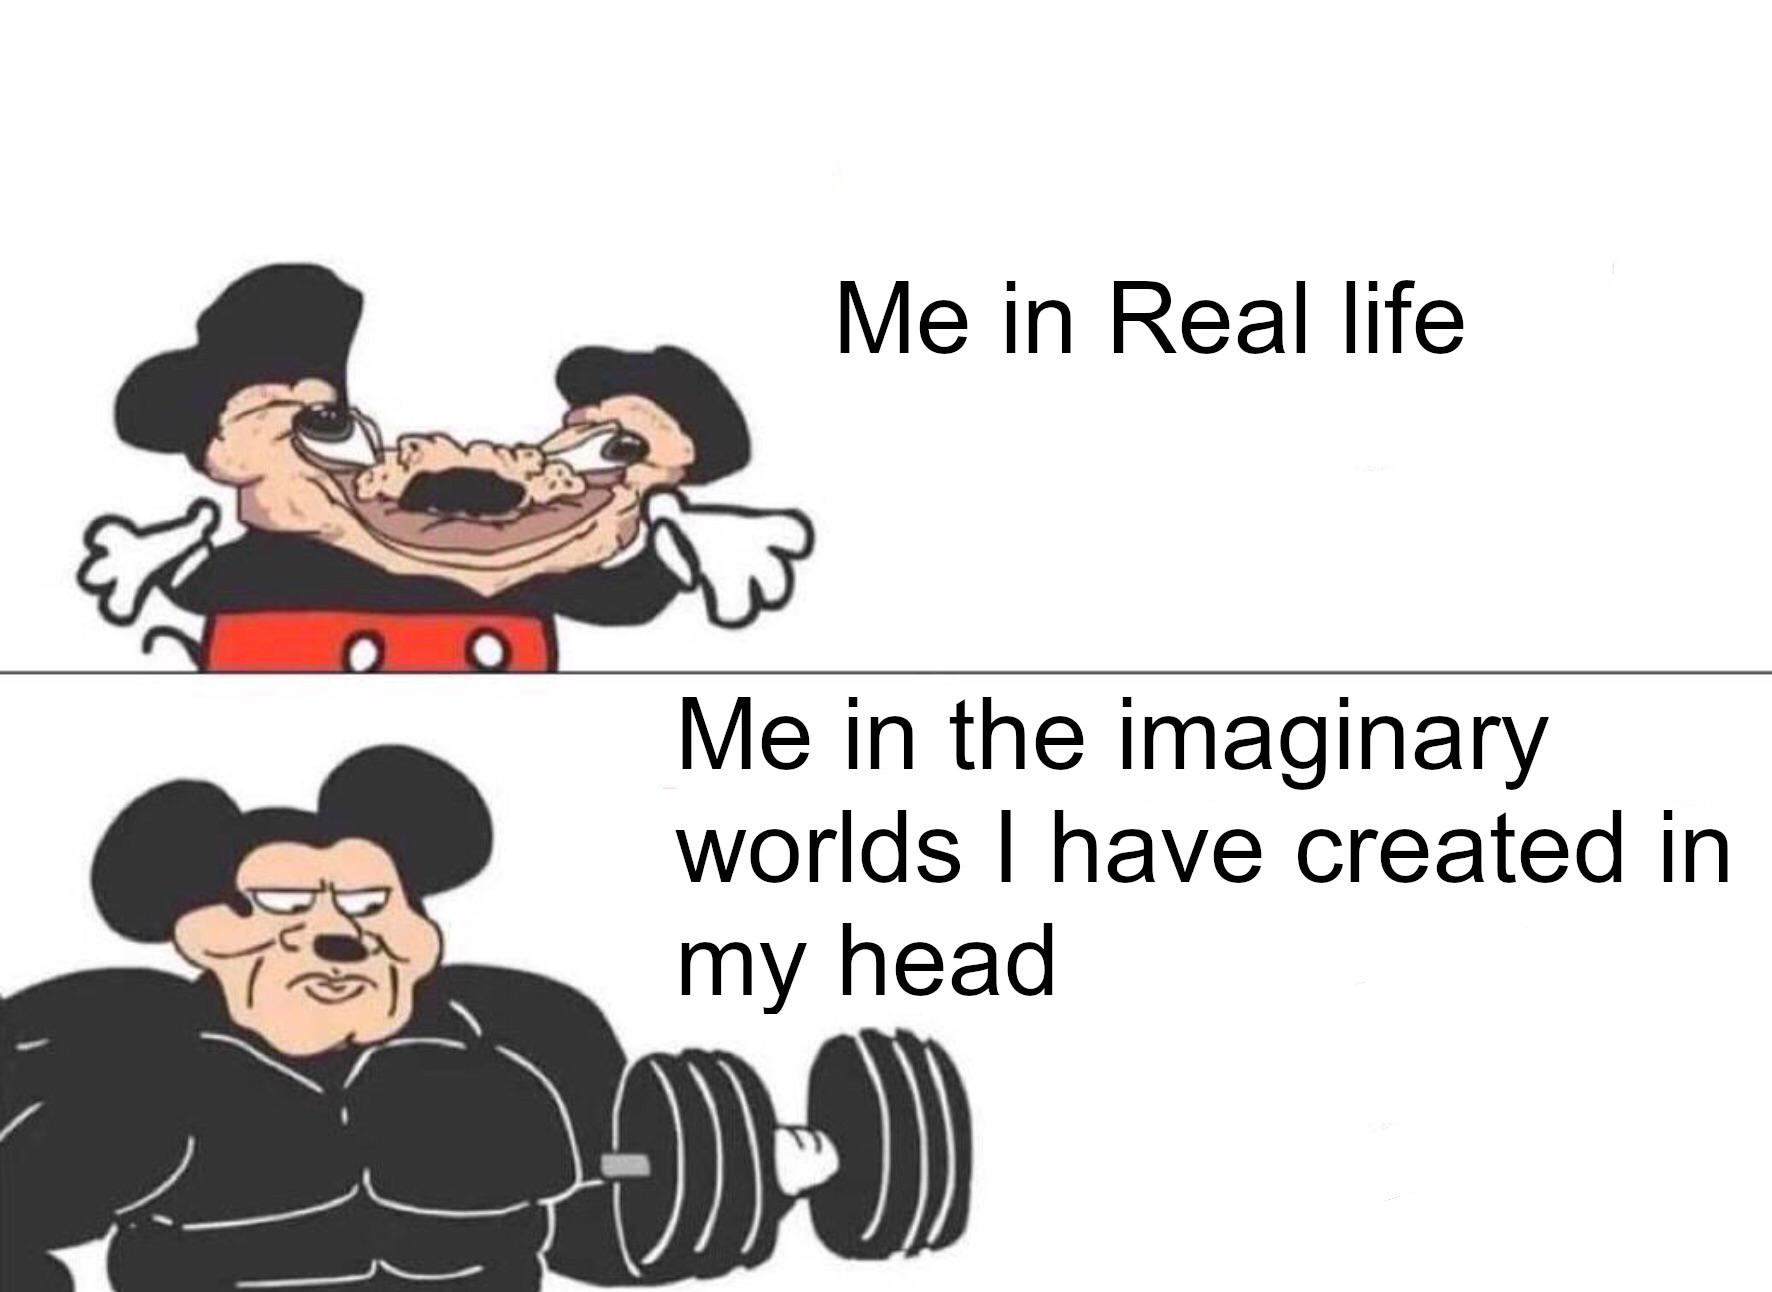 Depression, MaladaptiveDreaming, Mickey depression memes Depression, MaladaptiveDreaming, Mickey text: Me in Real life Me in the imaginary worlds I have created in my head 